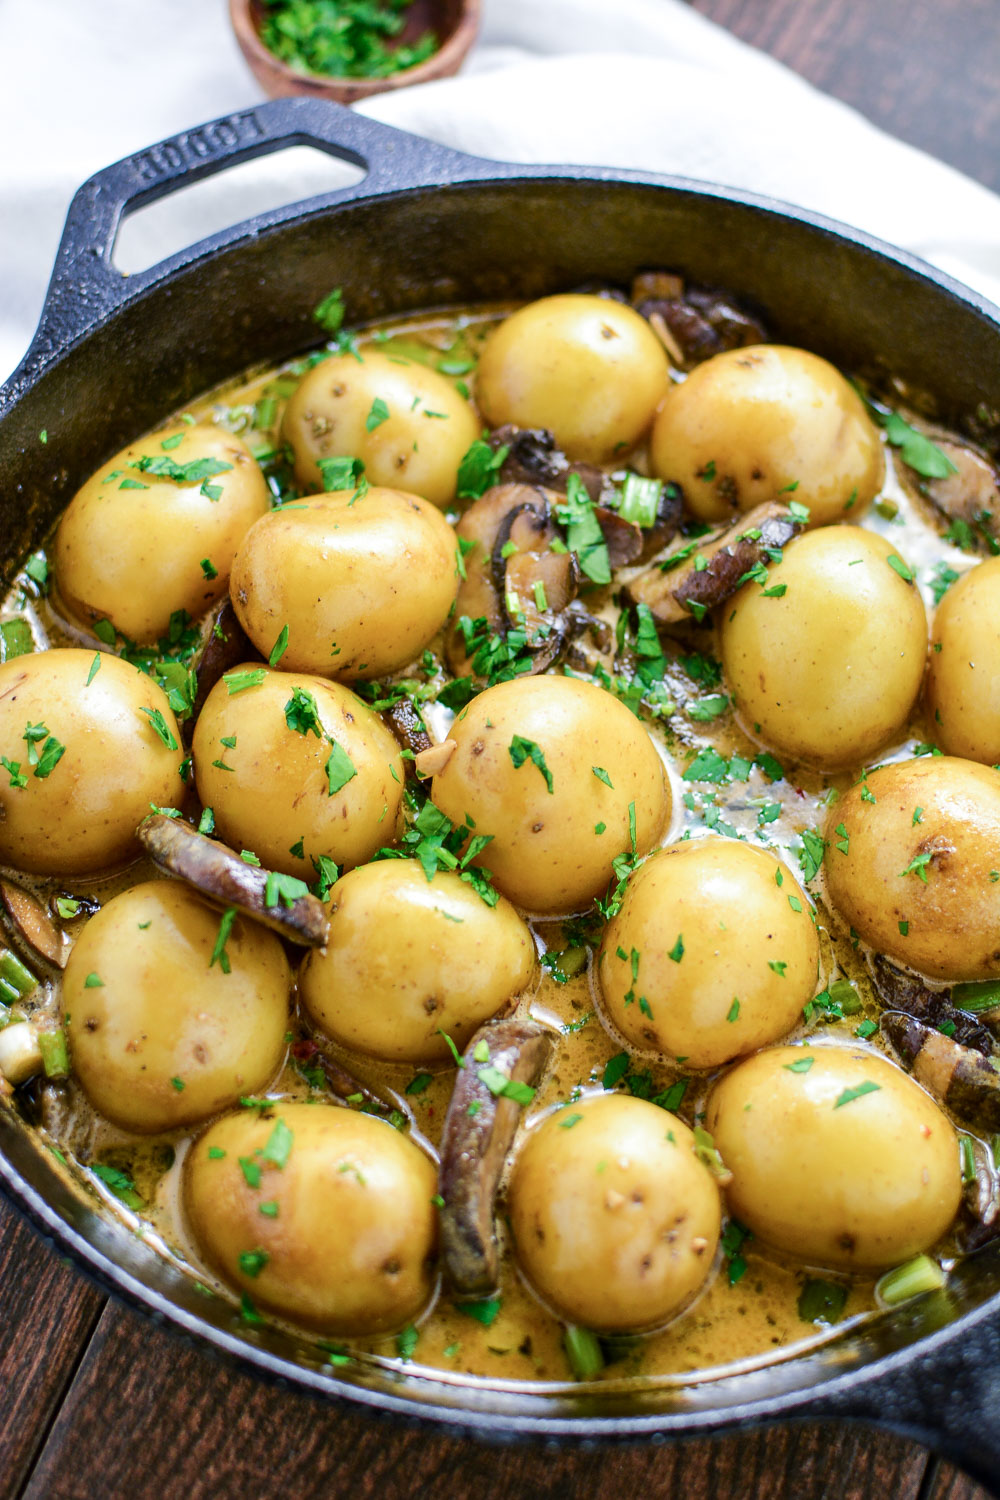 Skillet Potatoes with Creamy Pilsner, Mushroom Sauce is the perfect side dish recipe!